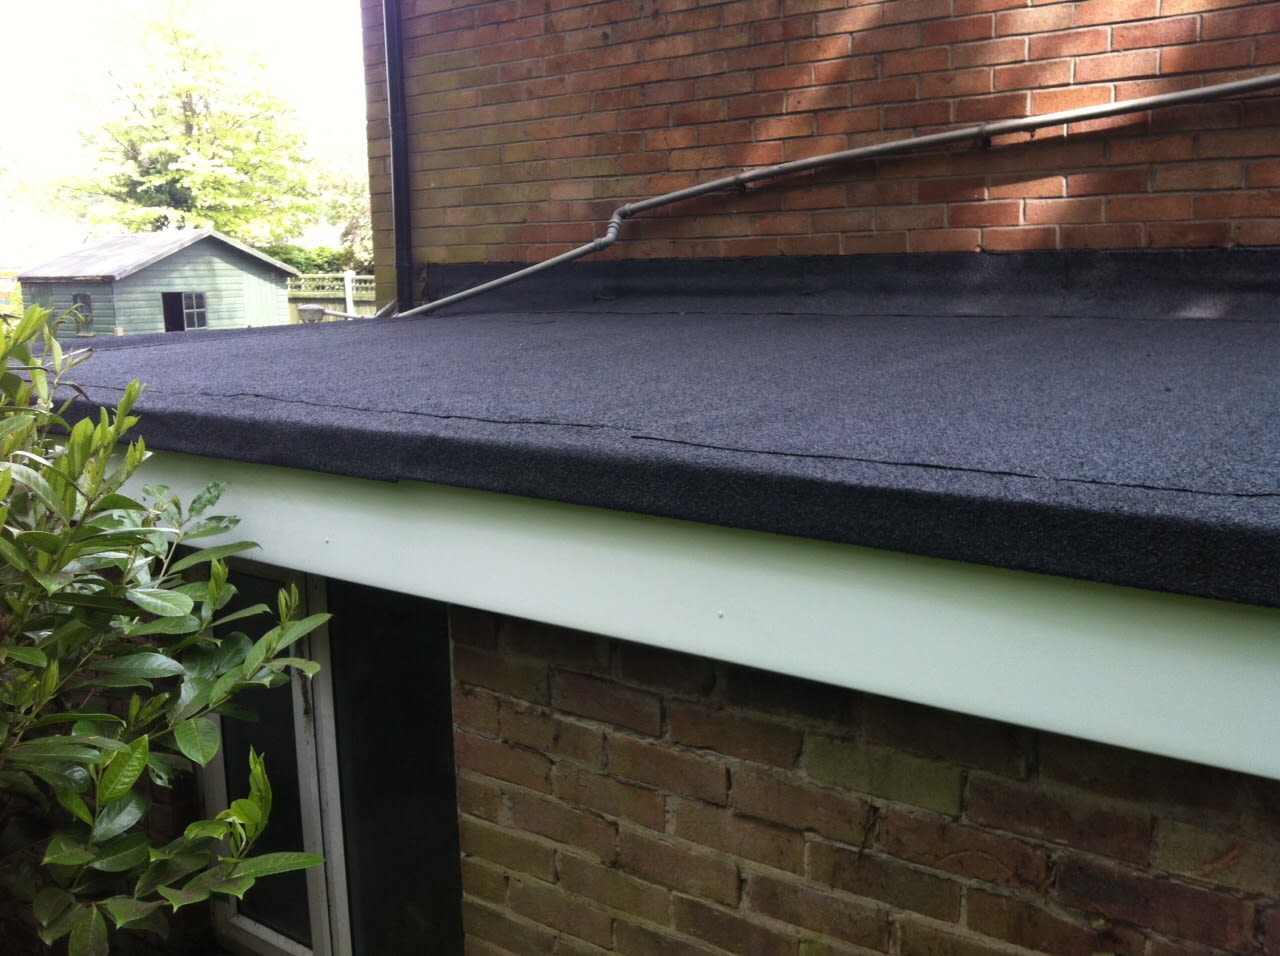 Roofwise Roofing Specialists Stoke-On-Trent 01782 954128